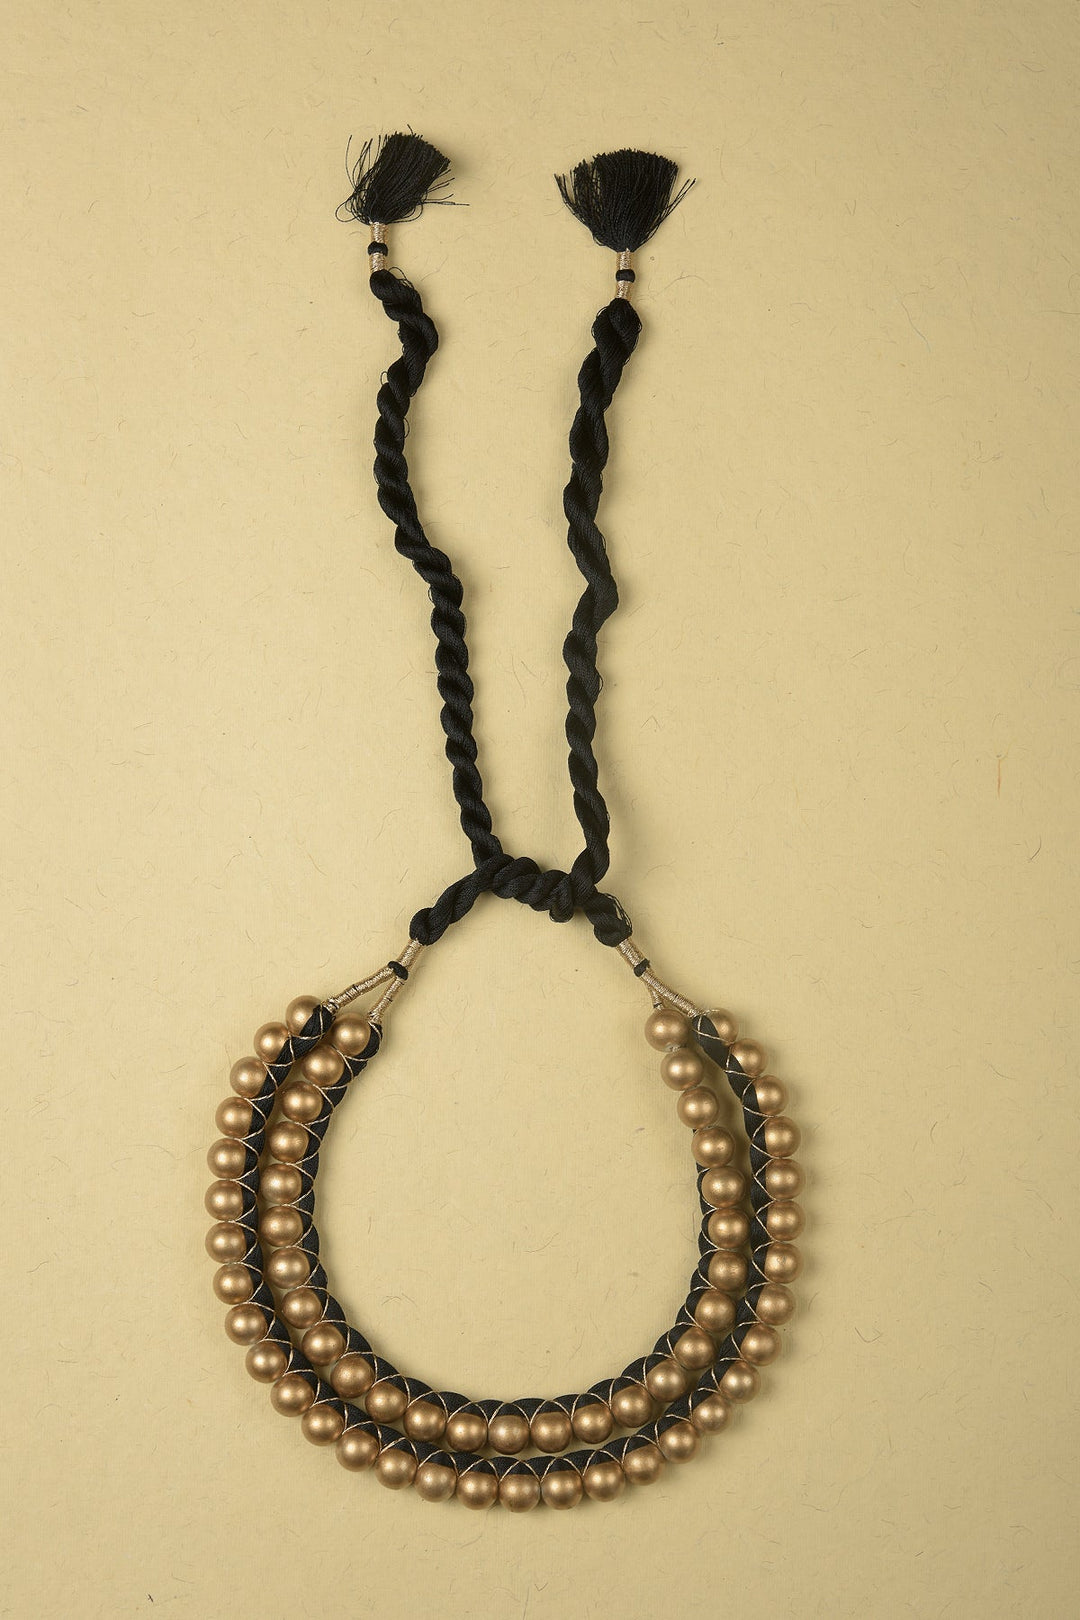 Small Necklace made of Silk Threads and Ball Beads